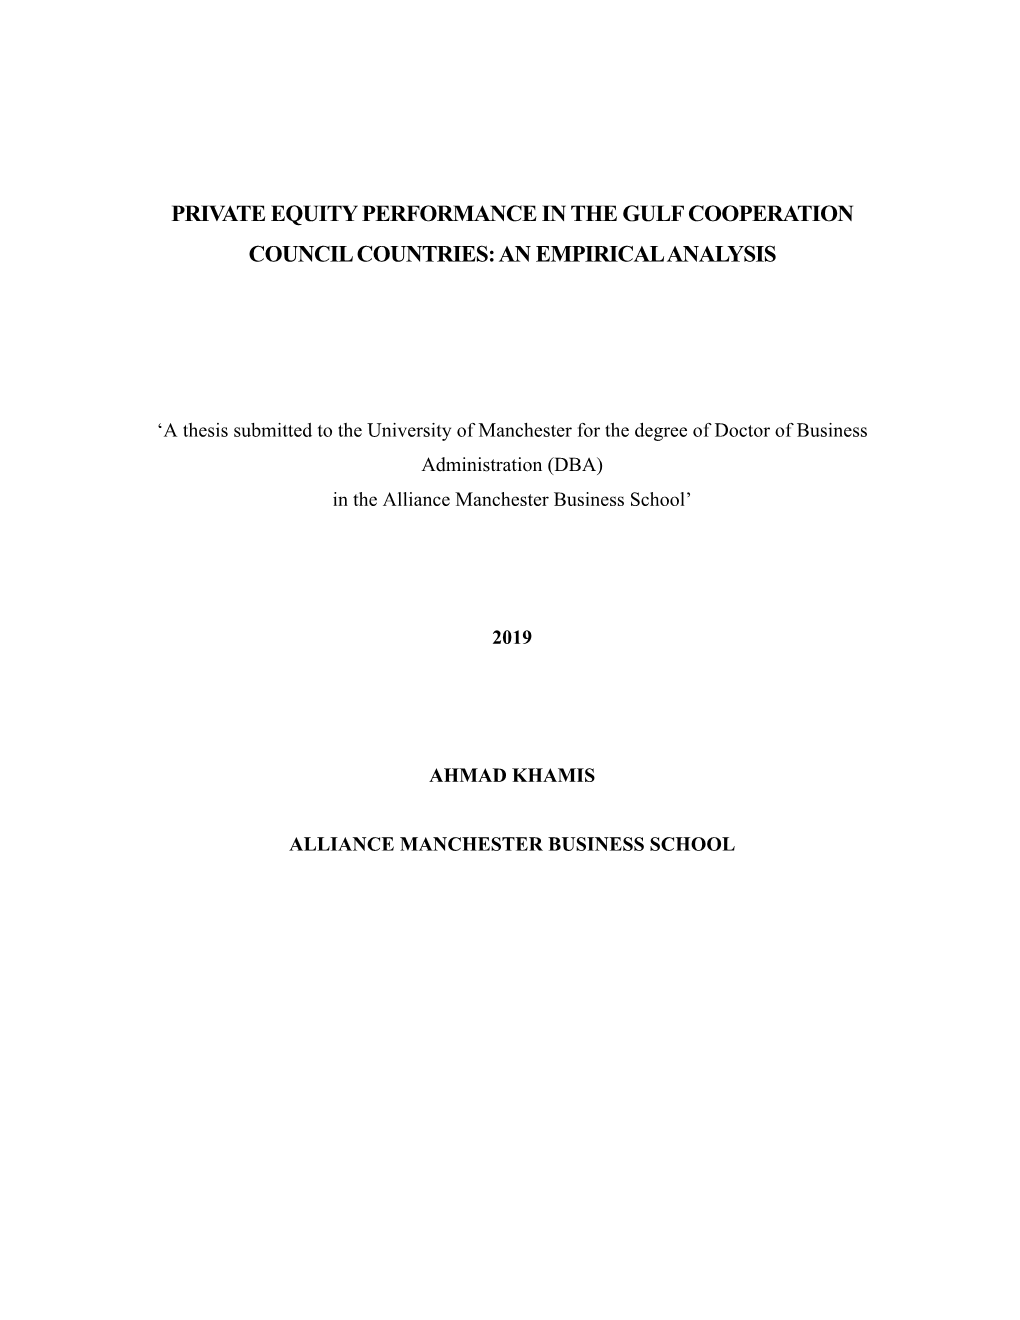 Private Equity Performance in the Gulf Cooperation Council Countries: an Empirical Analysis